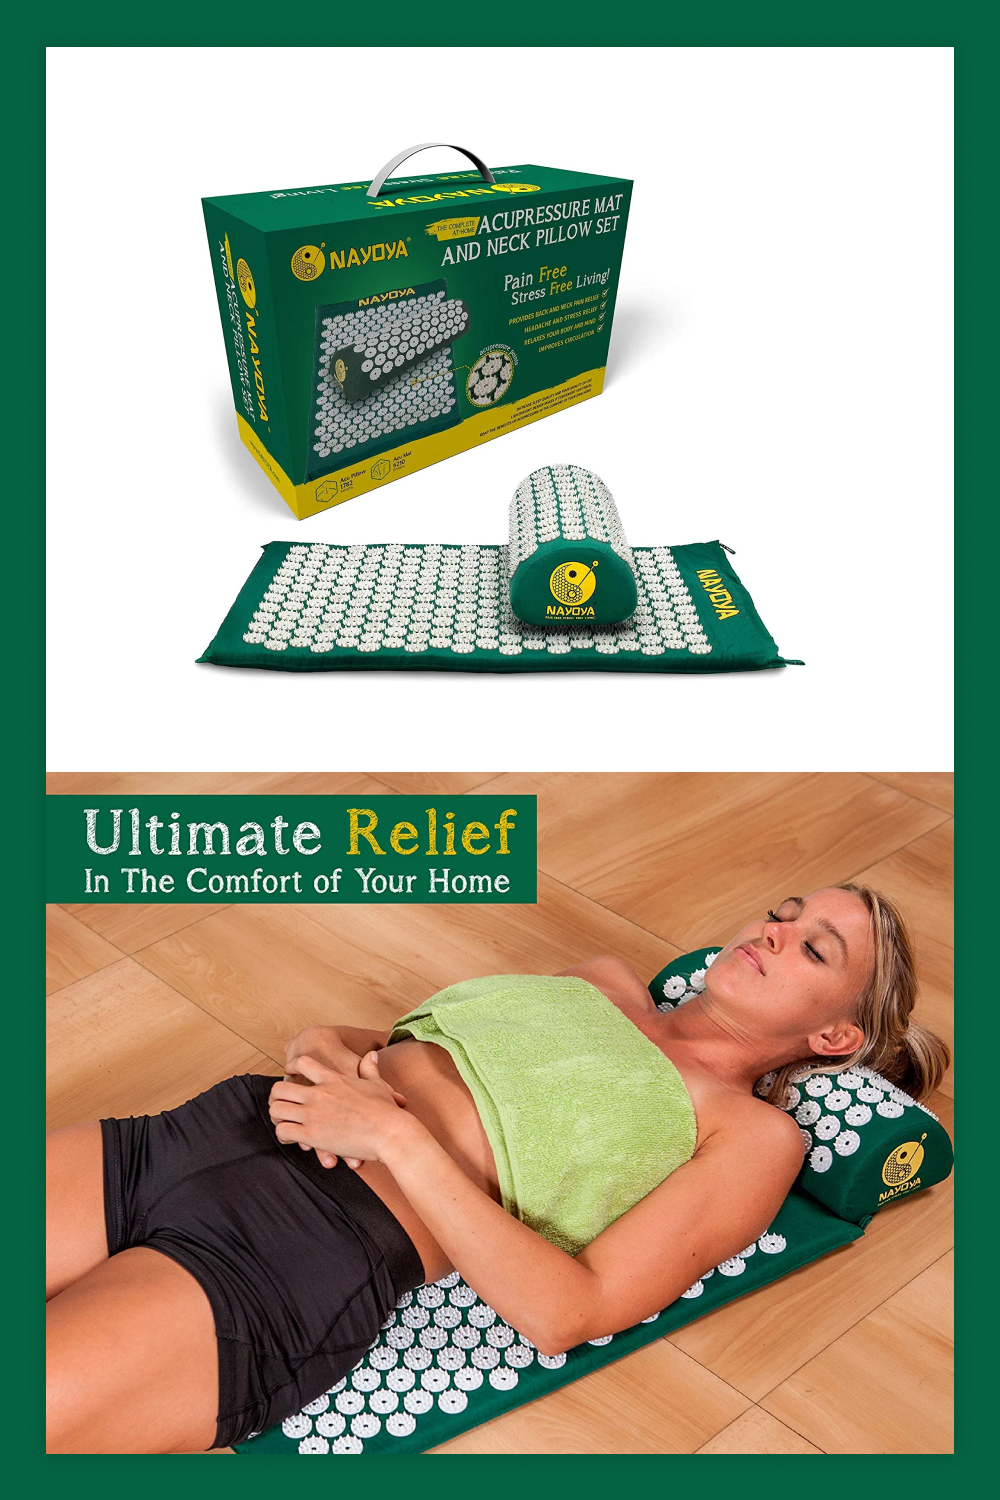 NAYOYA Neck and Back Pain Relief - Acupressure Mat and Neck Pillow Set.